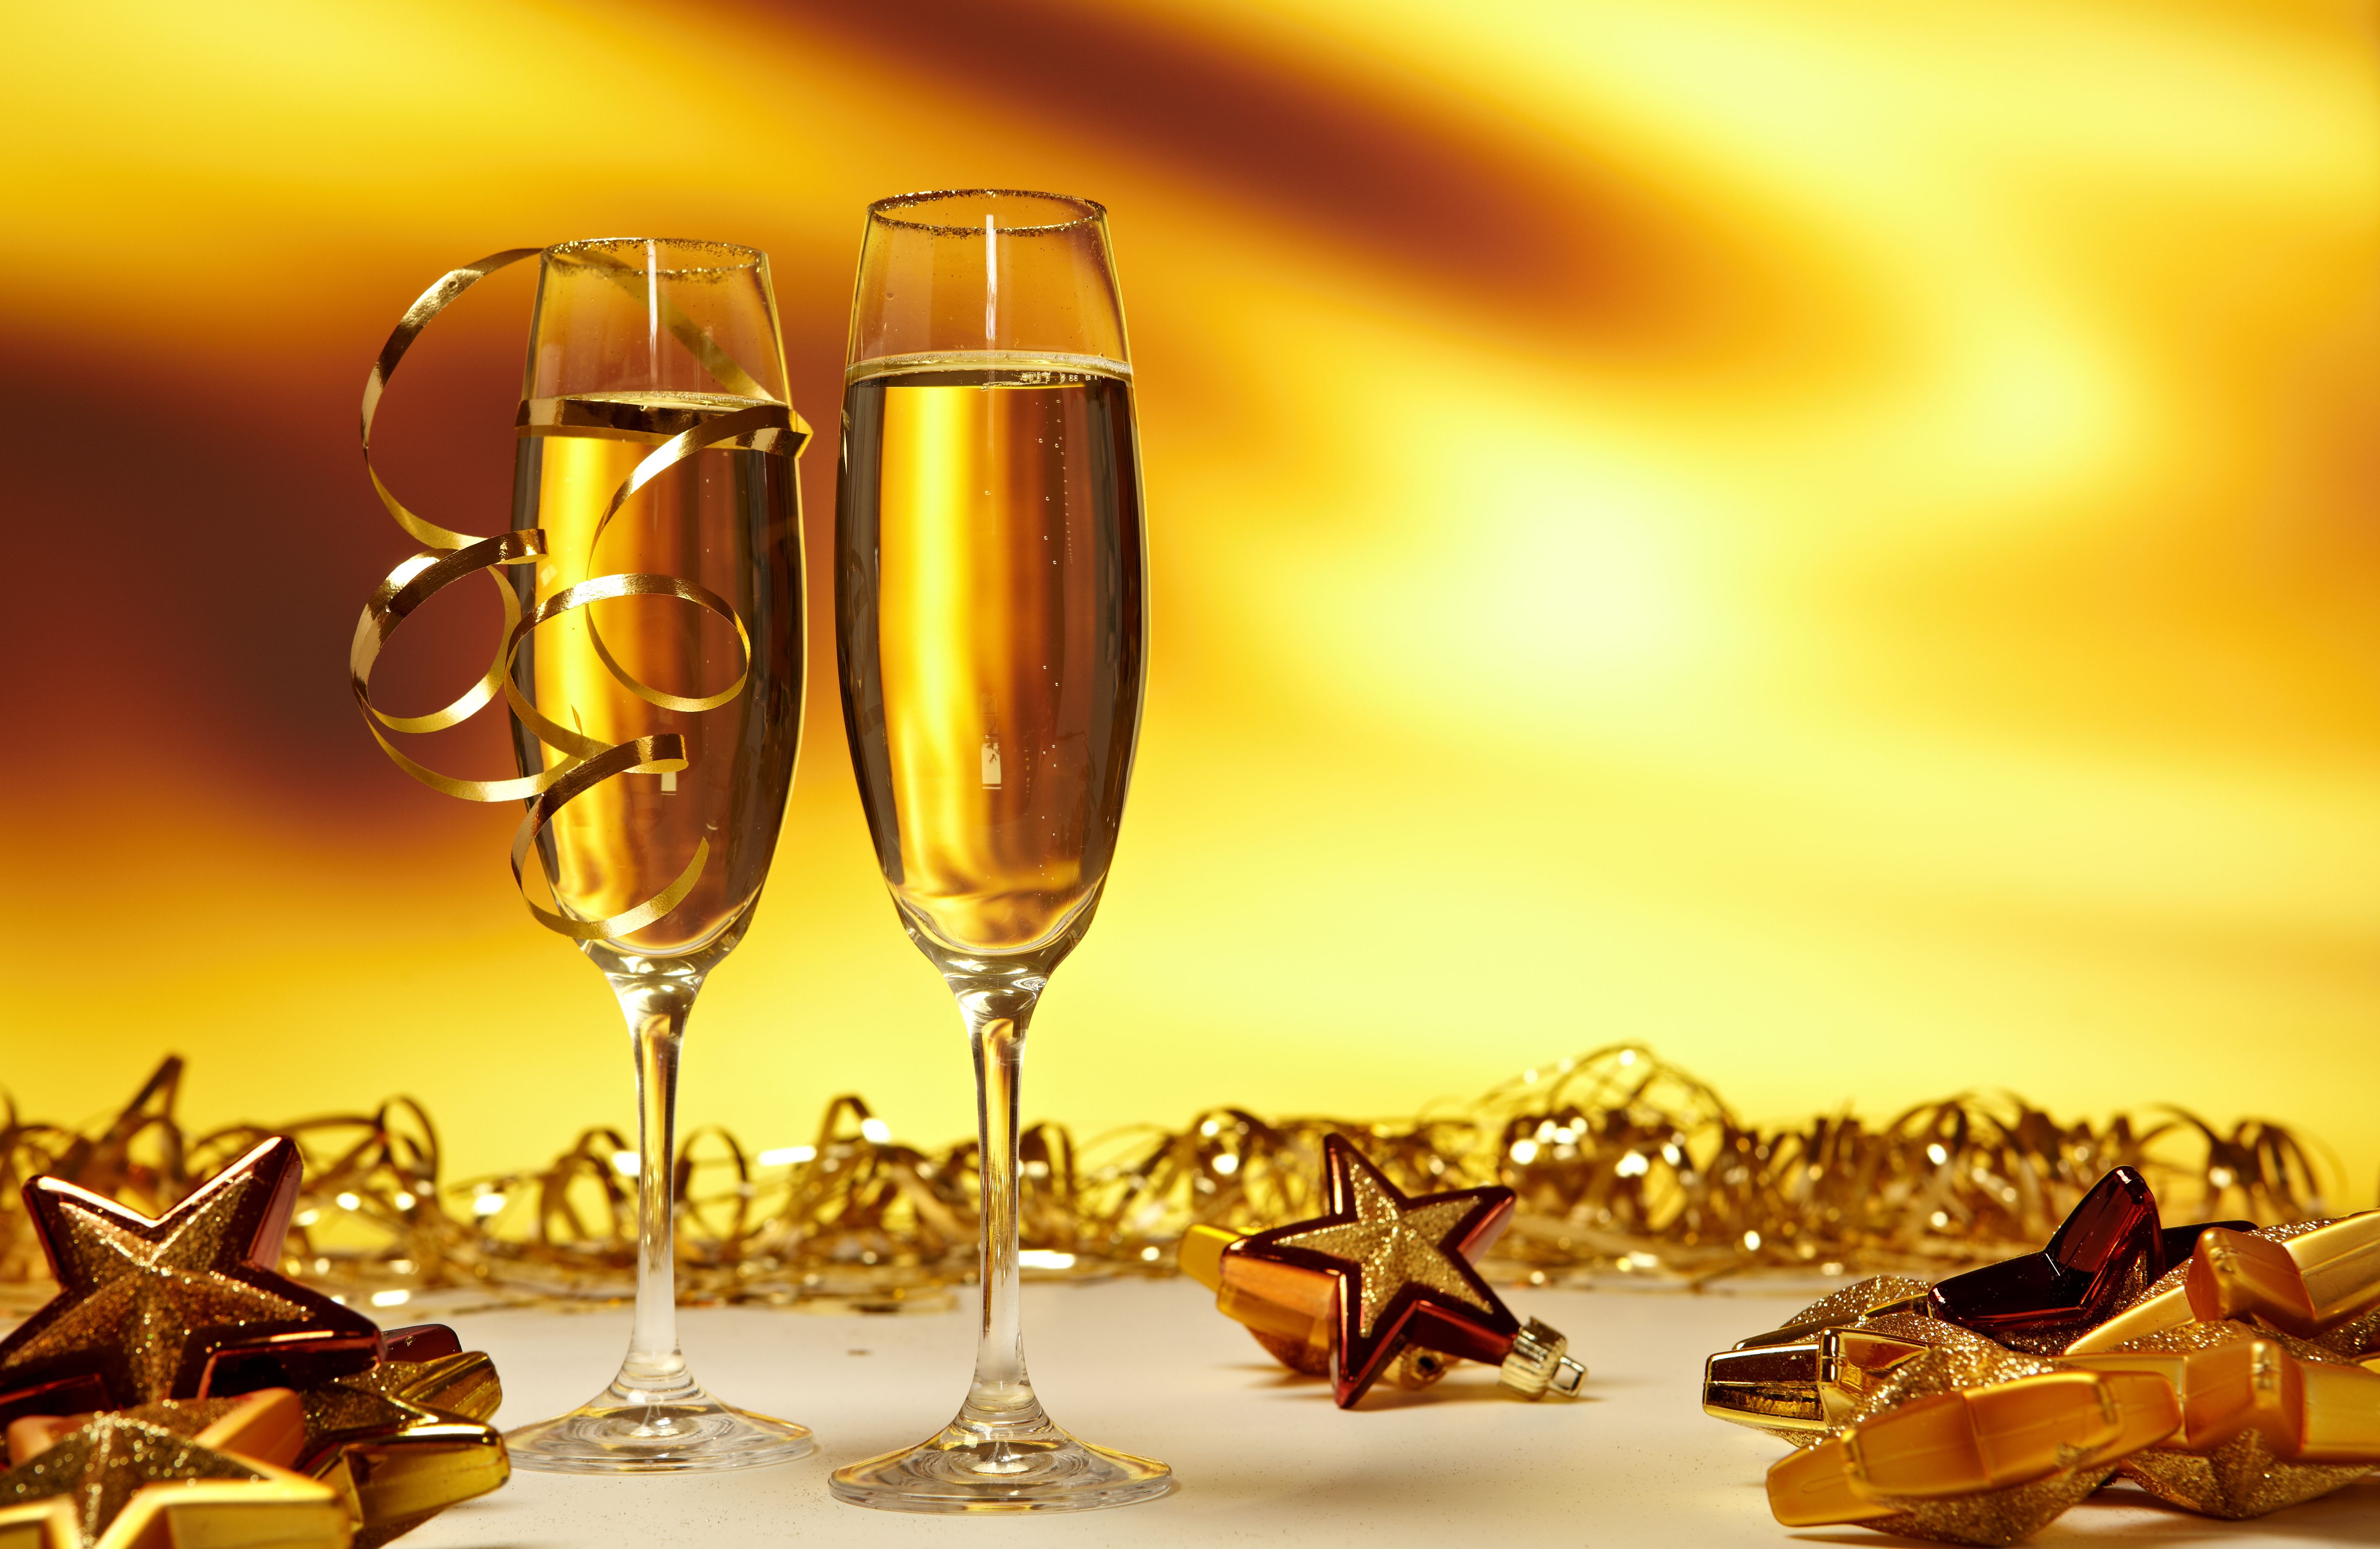 2016 New Year Wallpaper Downlord New Year Wallpapers Champagne ...